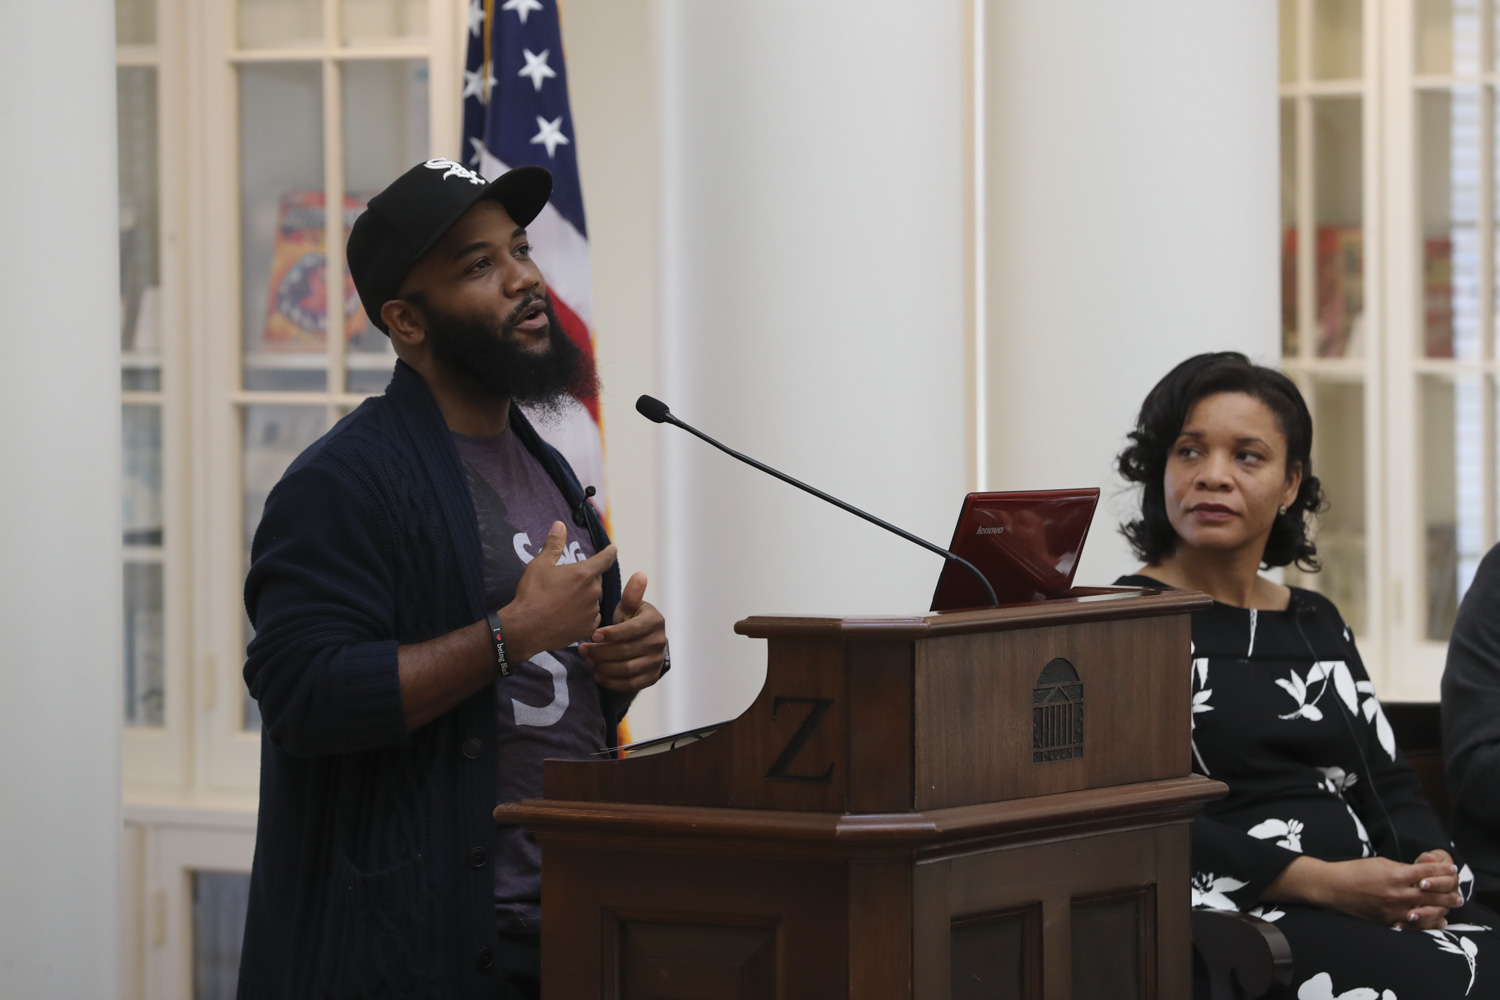 A.D. Carson, assistant professor of hip-hop, discusses hip-hop music in culture as moderator Talitha LeFlouria, Lisa Smith Discovery Associate Professor in African and African-American Studies, listens.